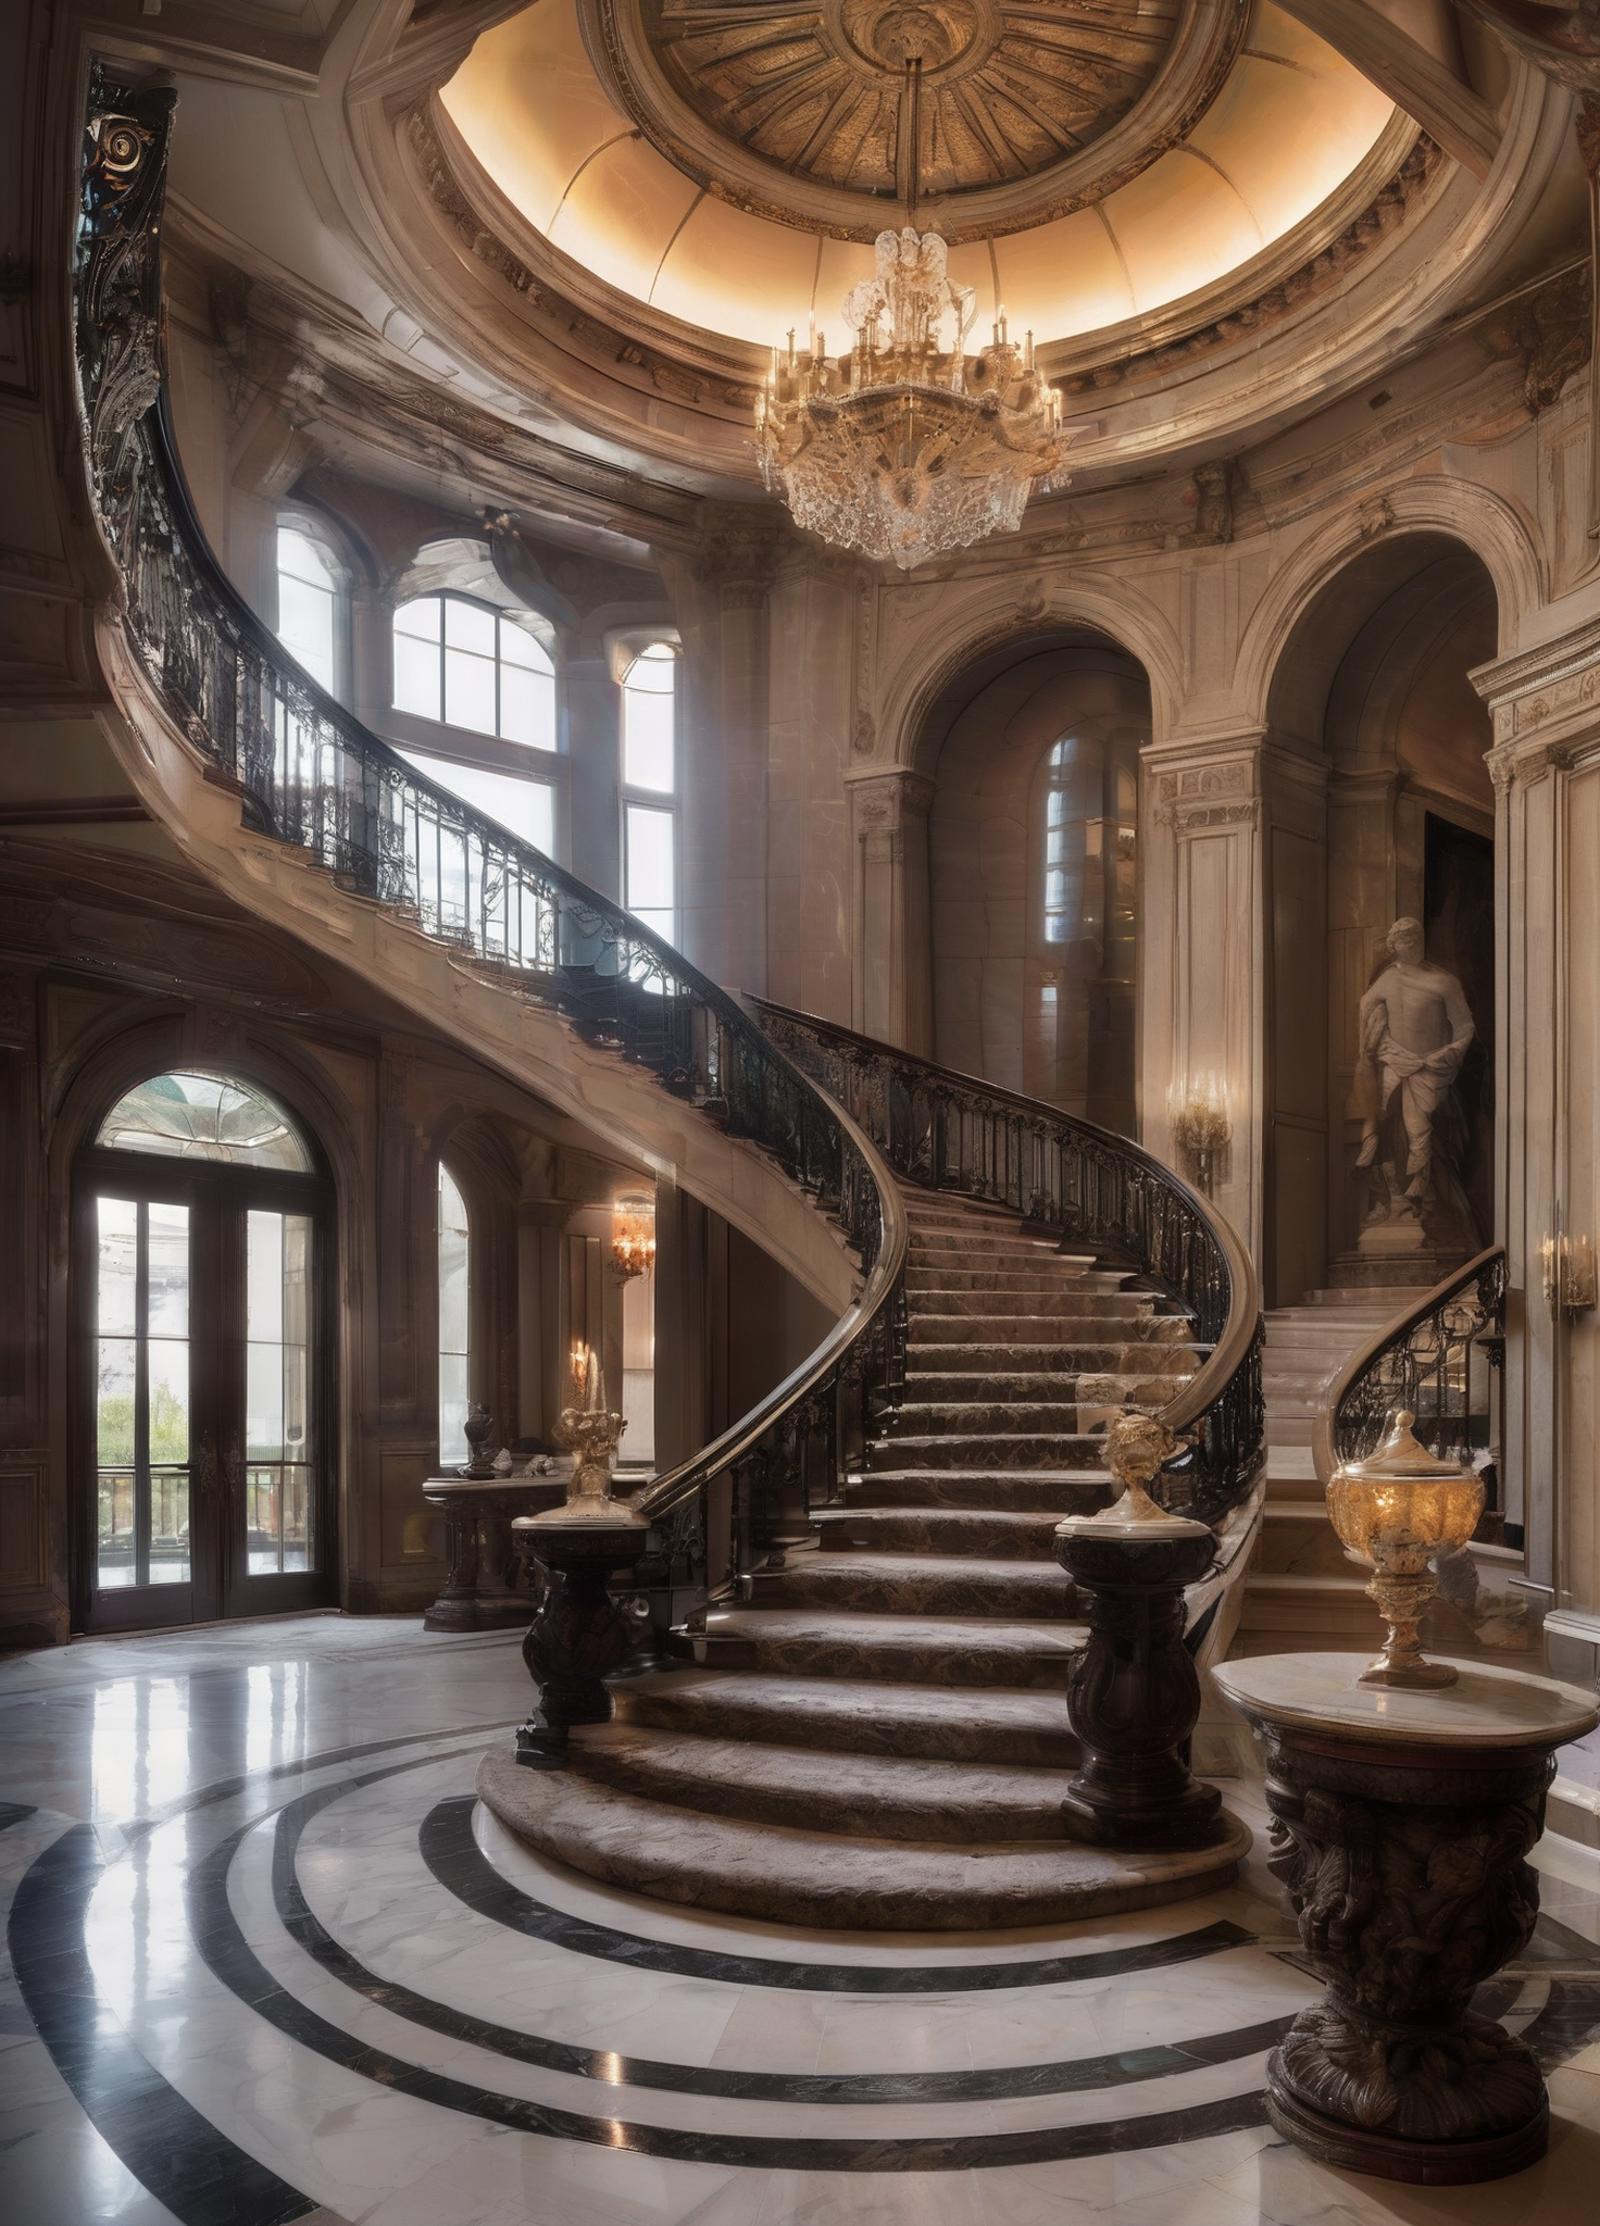 A grand staircase in a mansion with marble statues and chandelier.